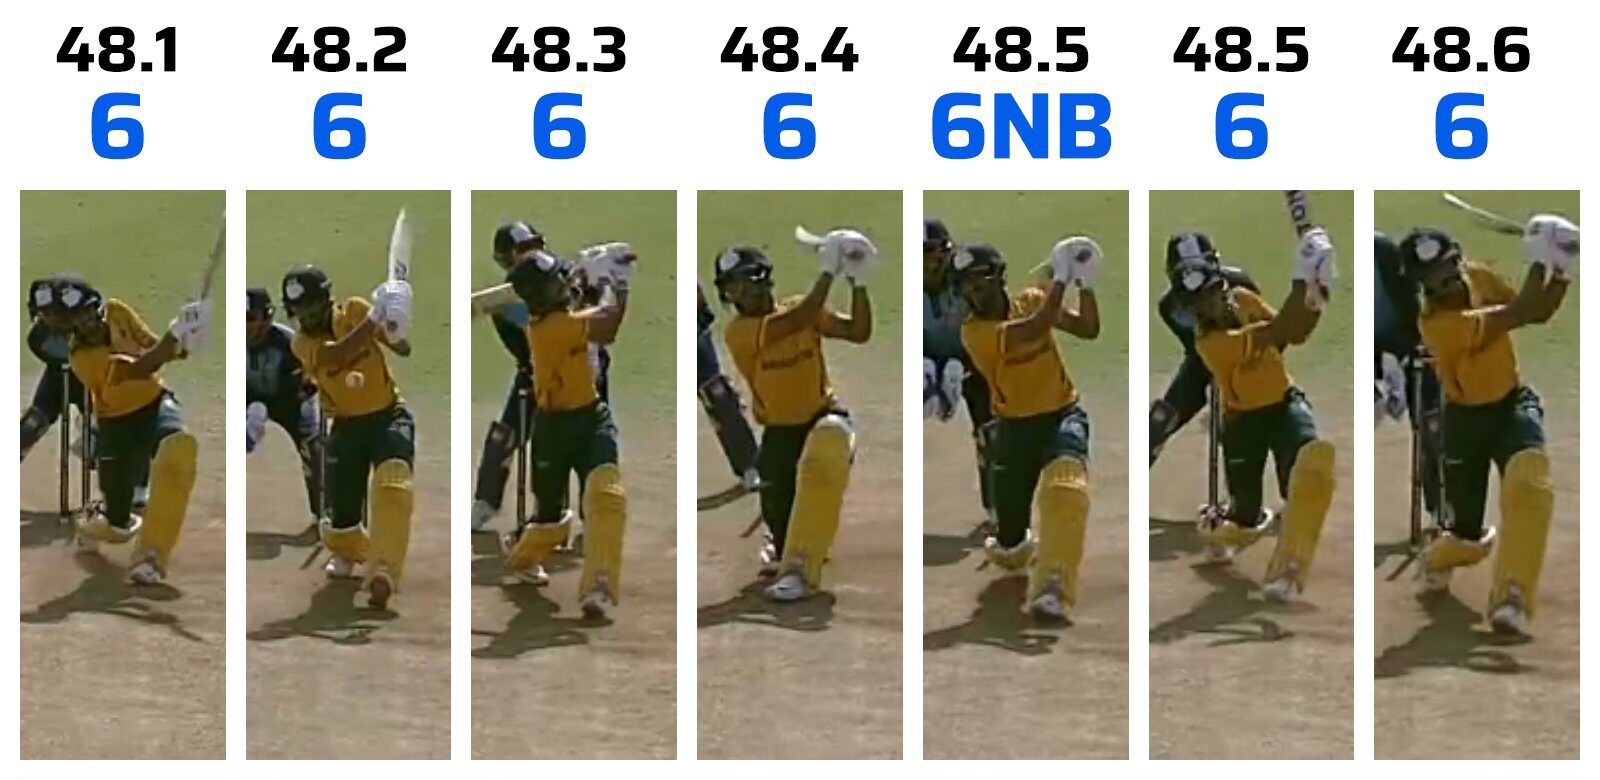 Mind-boggling 7 sixes in an over